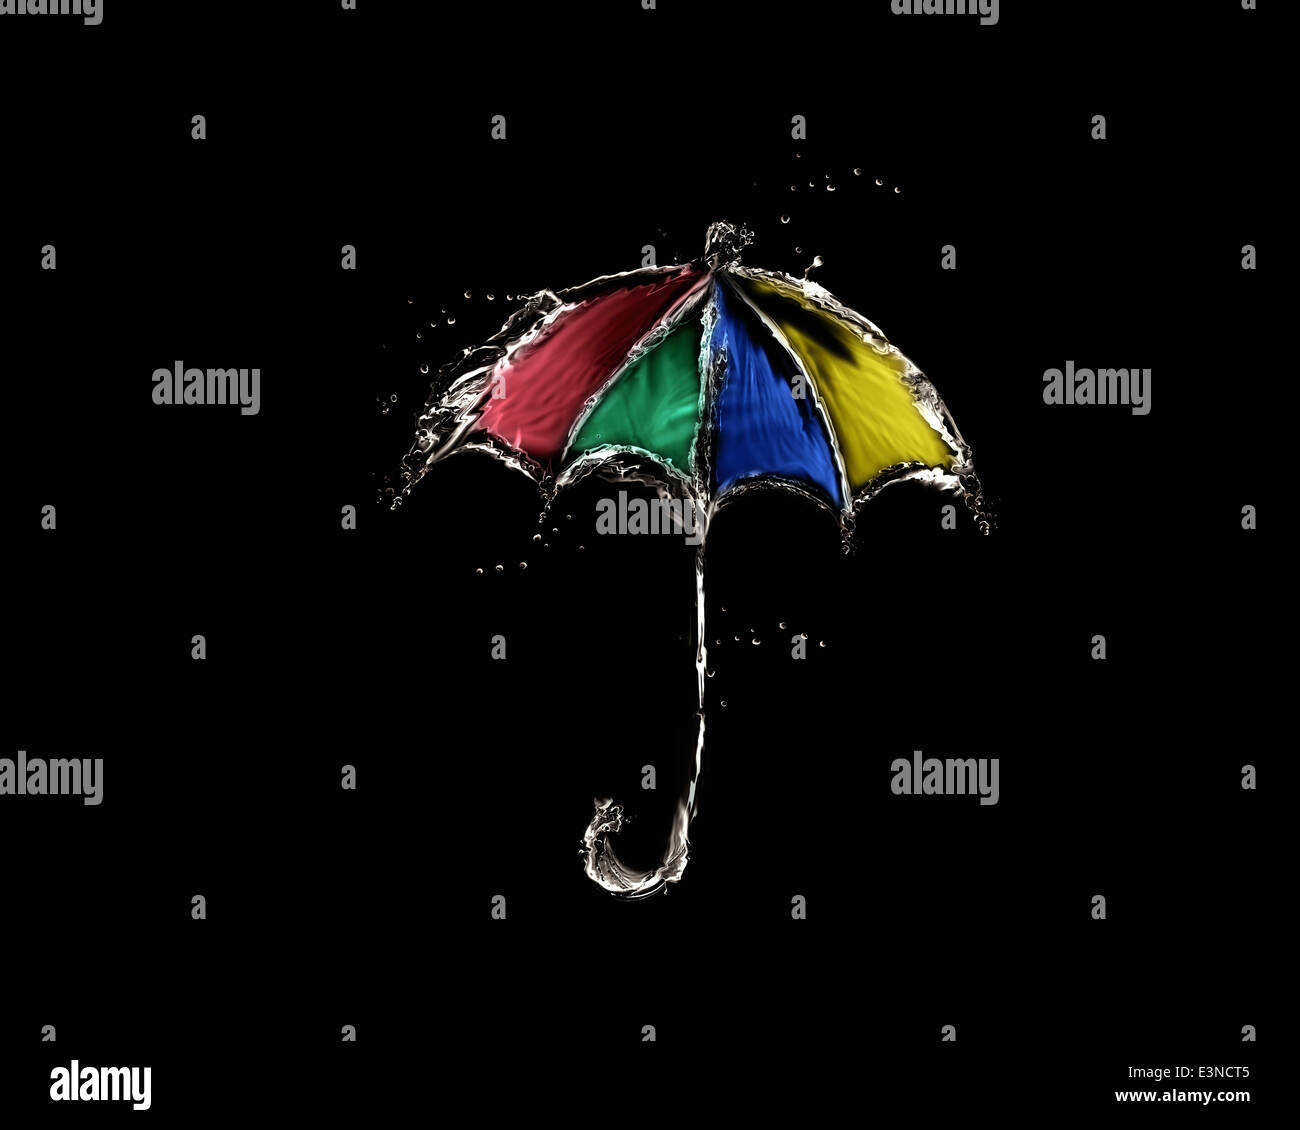 A colored umbrella made of water on black. Stock Photo